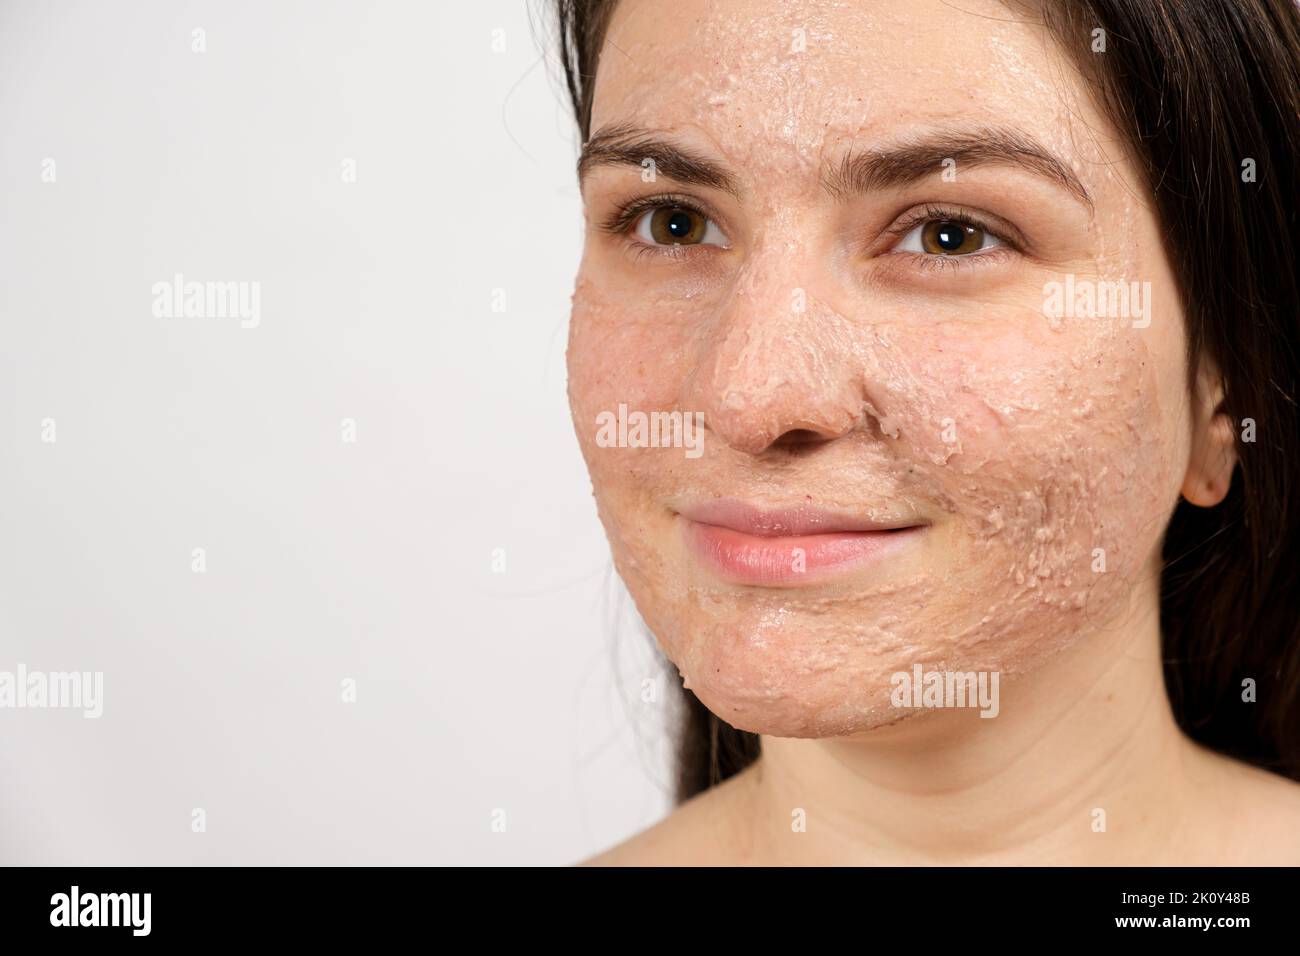 A young brunette woman makes cleansing facial treatments - a mask or scrub to cleanse and nourish the skin. Stock Photo